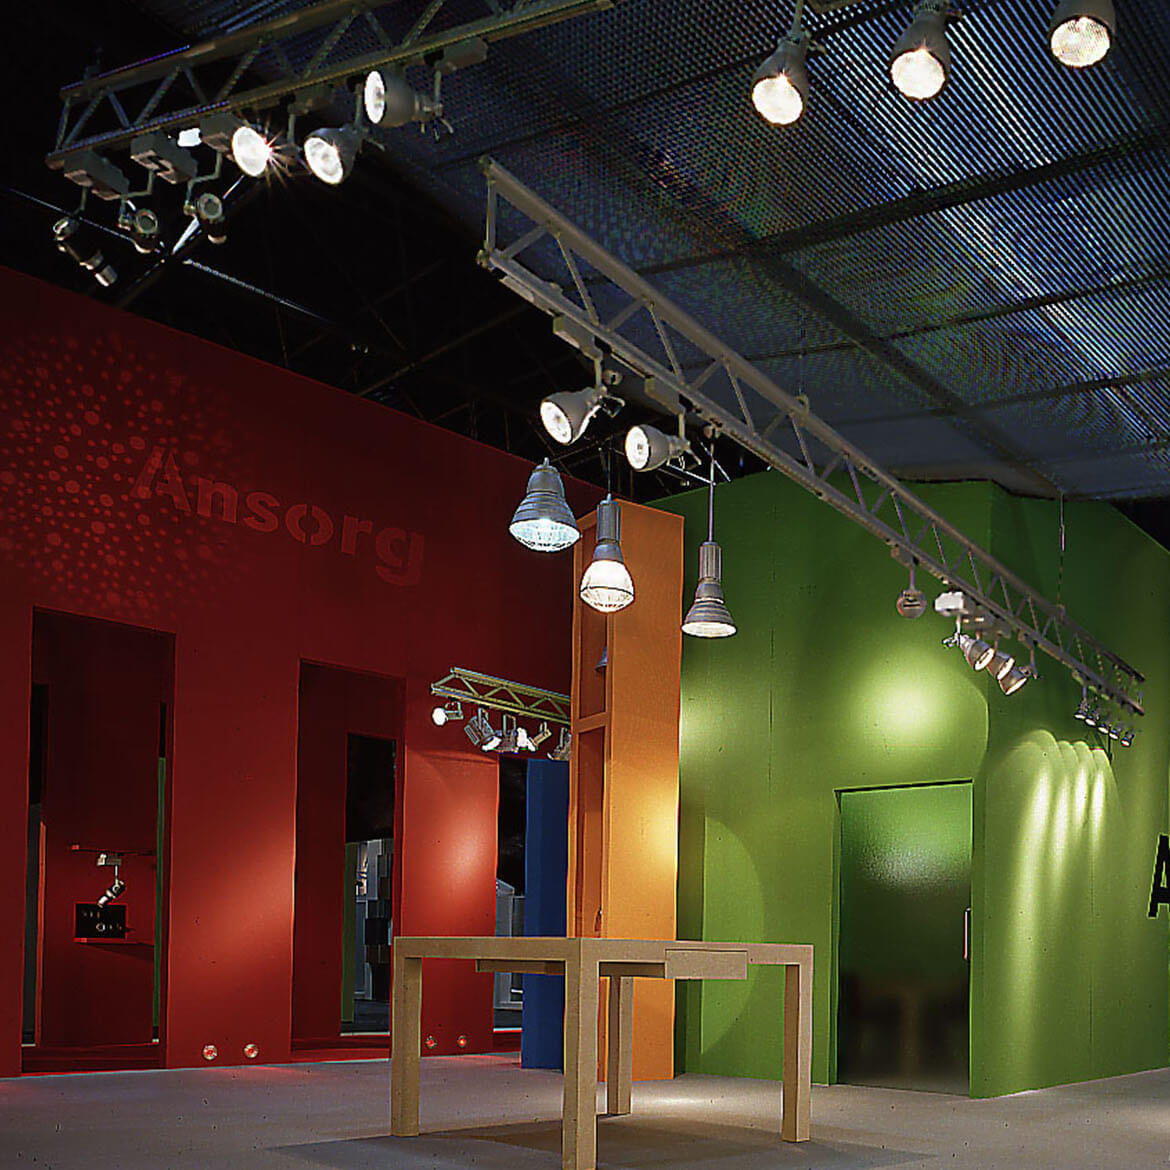 Ansorg's EuroShop stand 1966